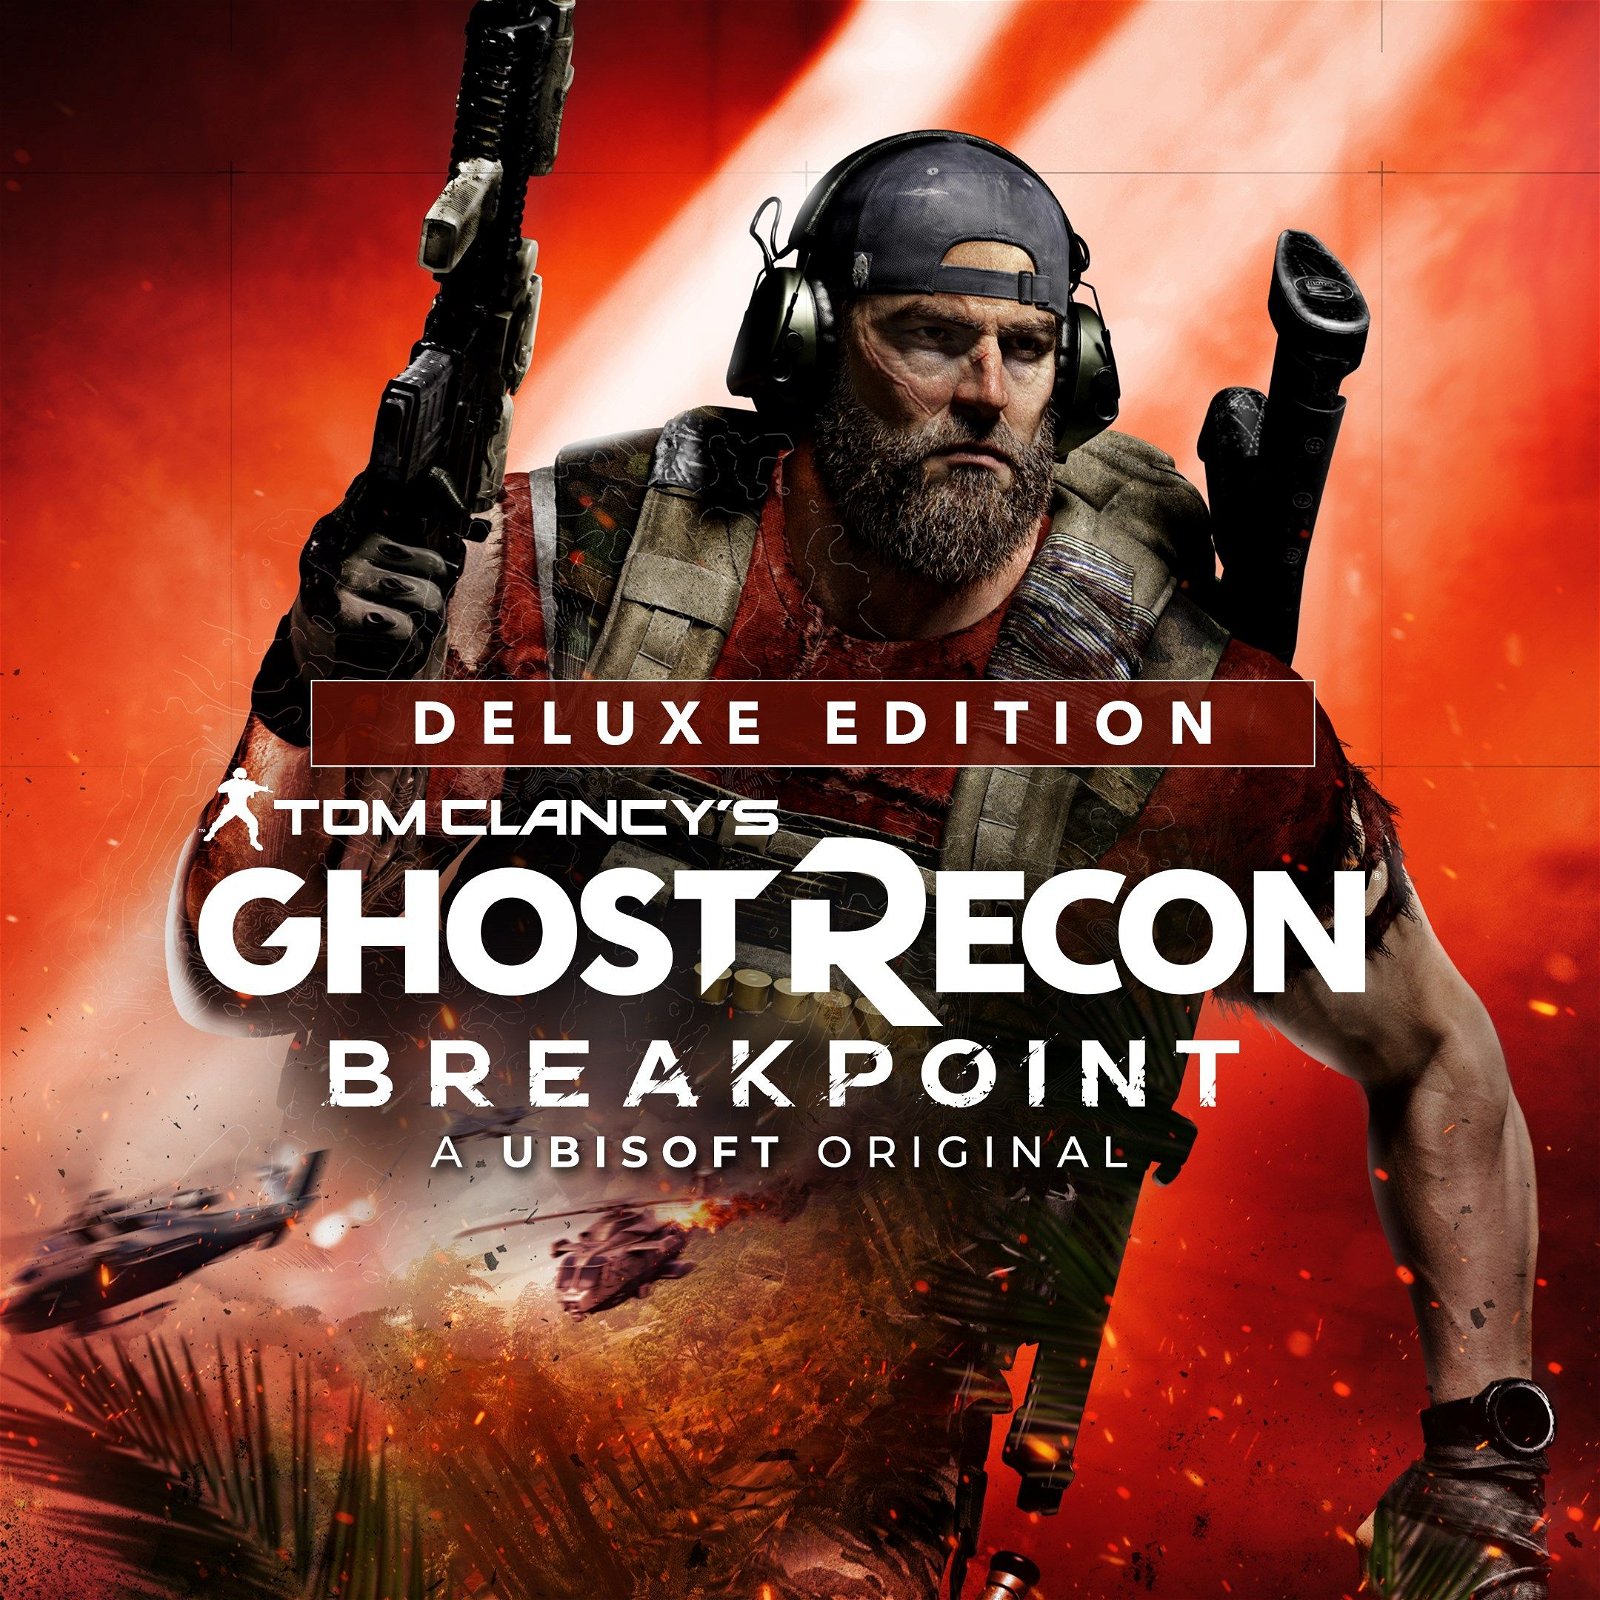 Image of Tom Clancy's Ghost Recon Breakpoint Deluxe Edition